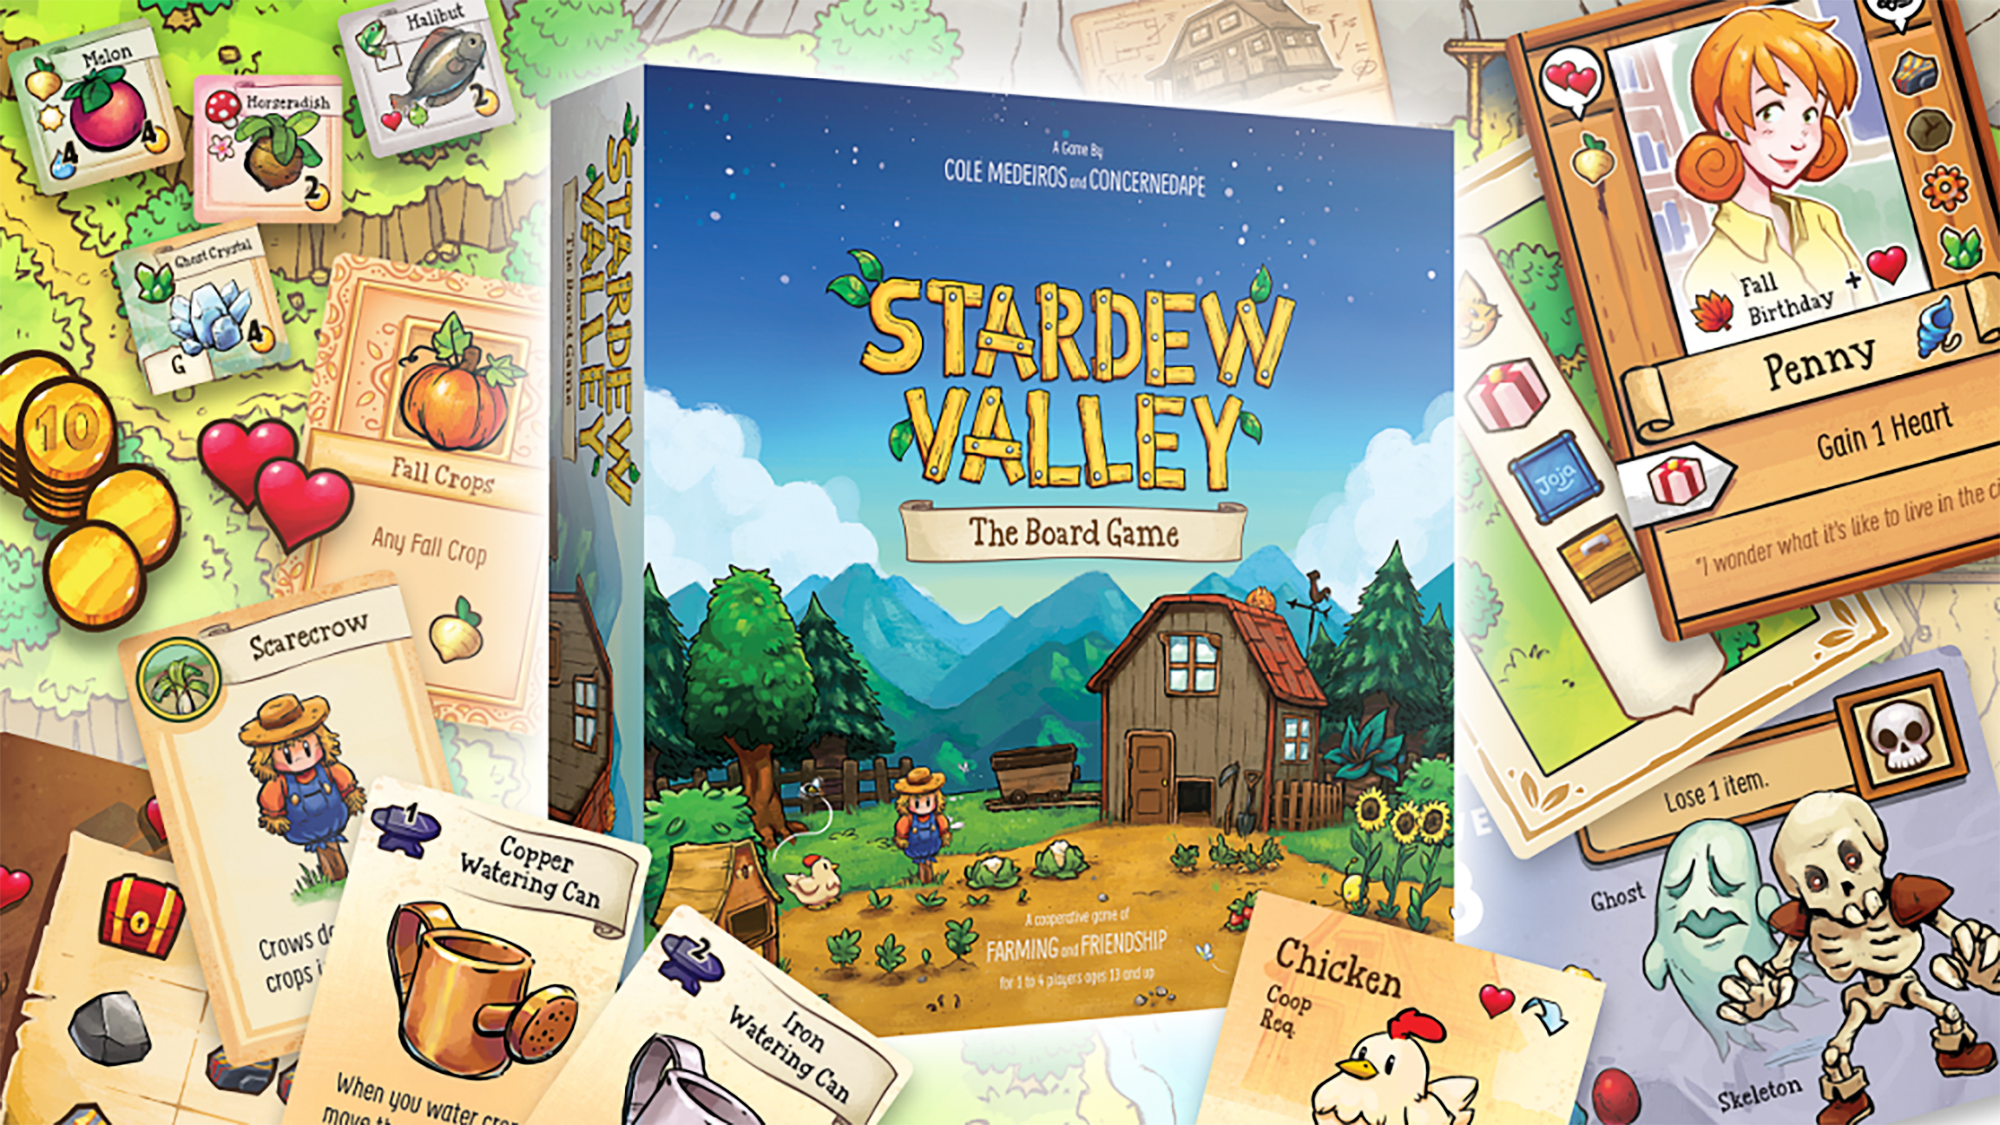 The Stardew Valley tabletop board game from ConcernedApe. (Image courtesy StardewValley.net)